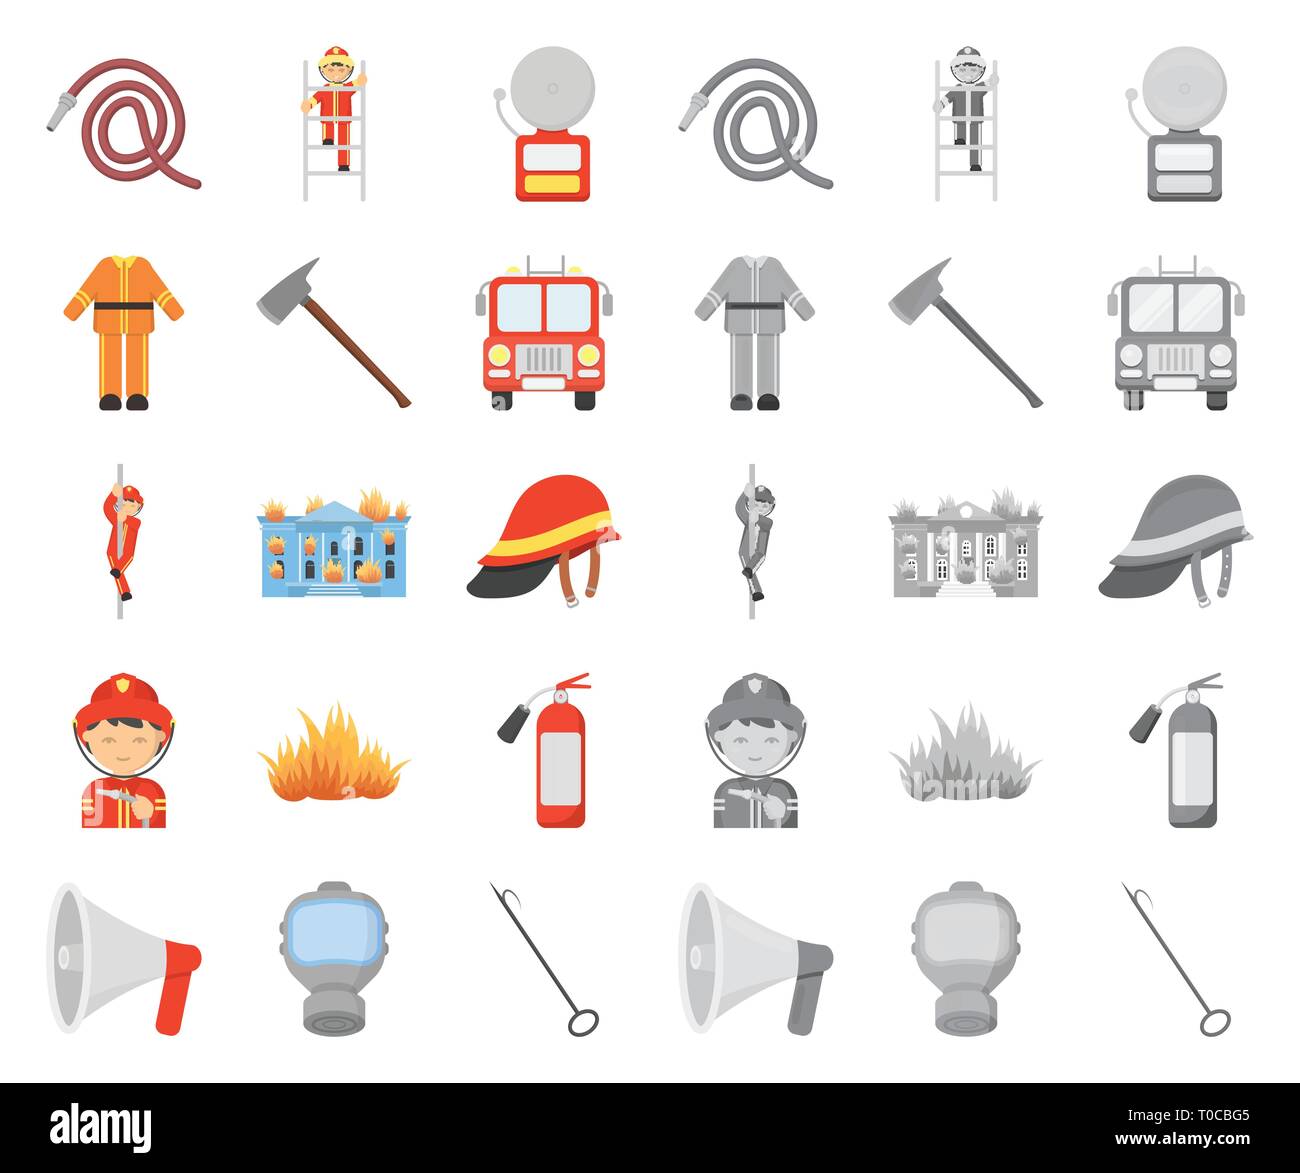 accessories,apparatus,art,attribute,axe,bucket,building,bunker,cartoon,mono,collection,conical,department,design,equipment,extinguishing,extingushier,fire,firefighter,firefighting,flame,gas,gear,helmet,icon,illustration,isolated,logo,mask,organization,pike,pole,pump,ring,separation,service,set,sign,slide,symbol,tools,vector,web Vector Vectors , Stock Vector